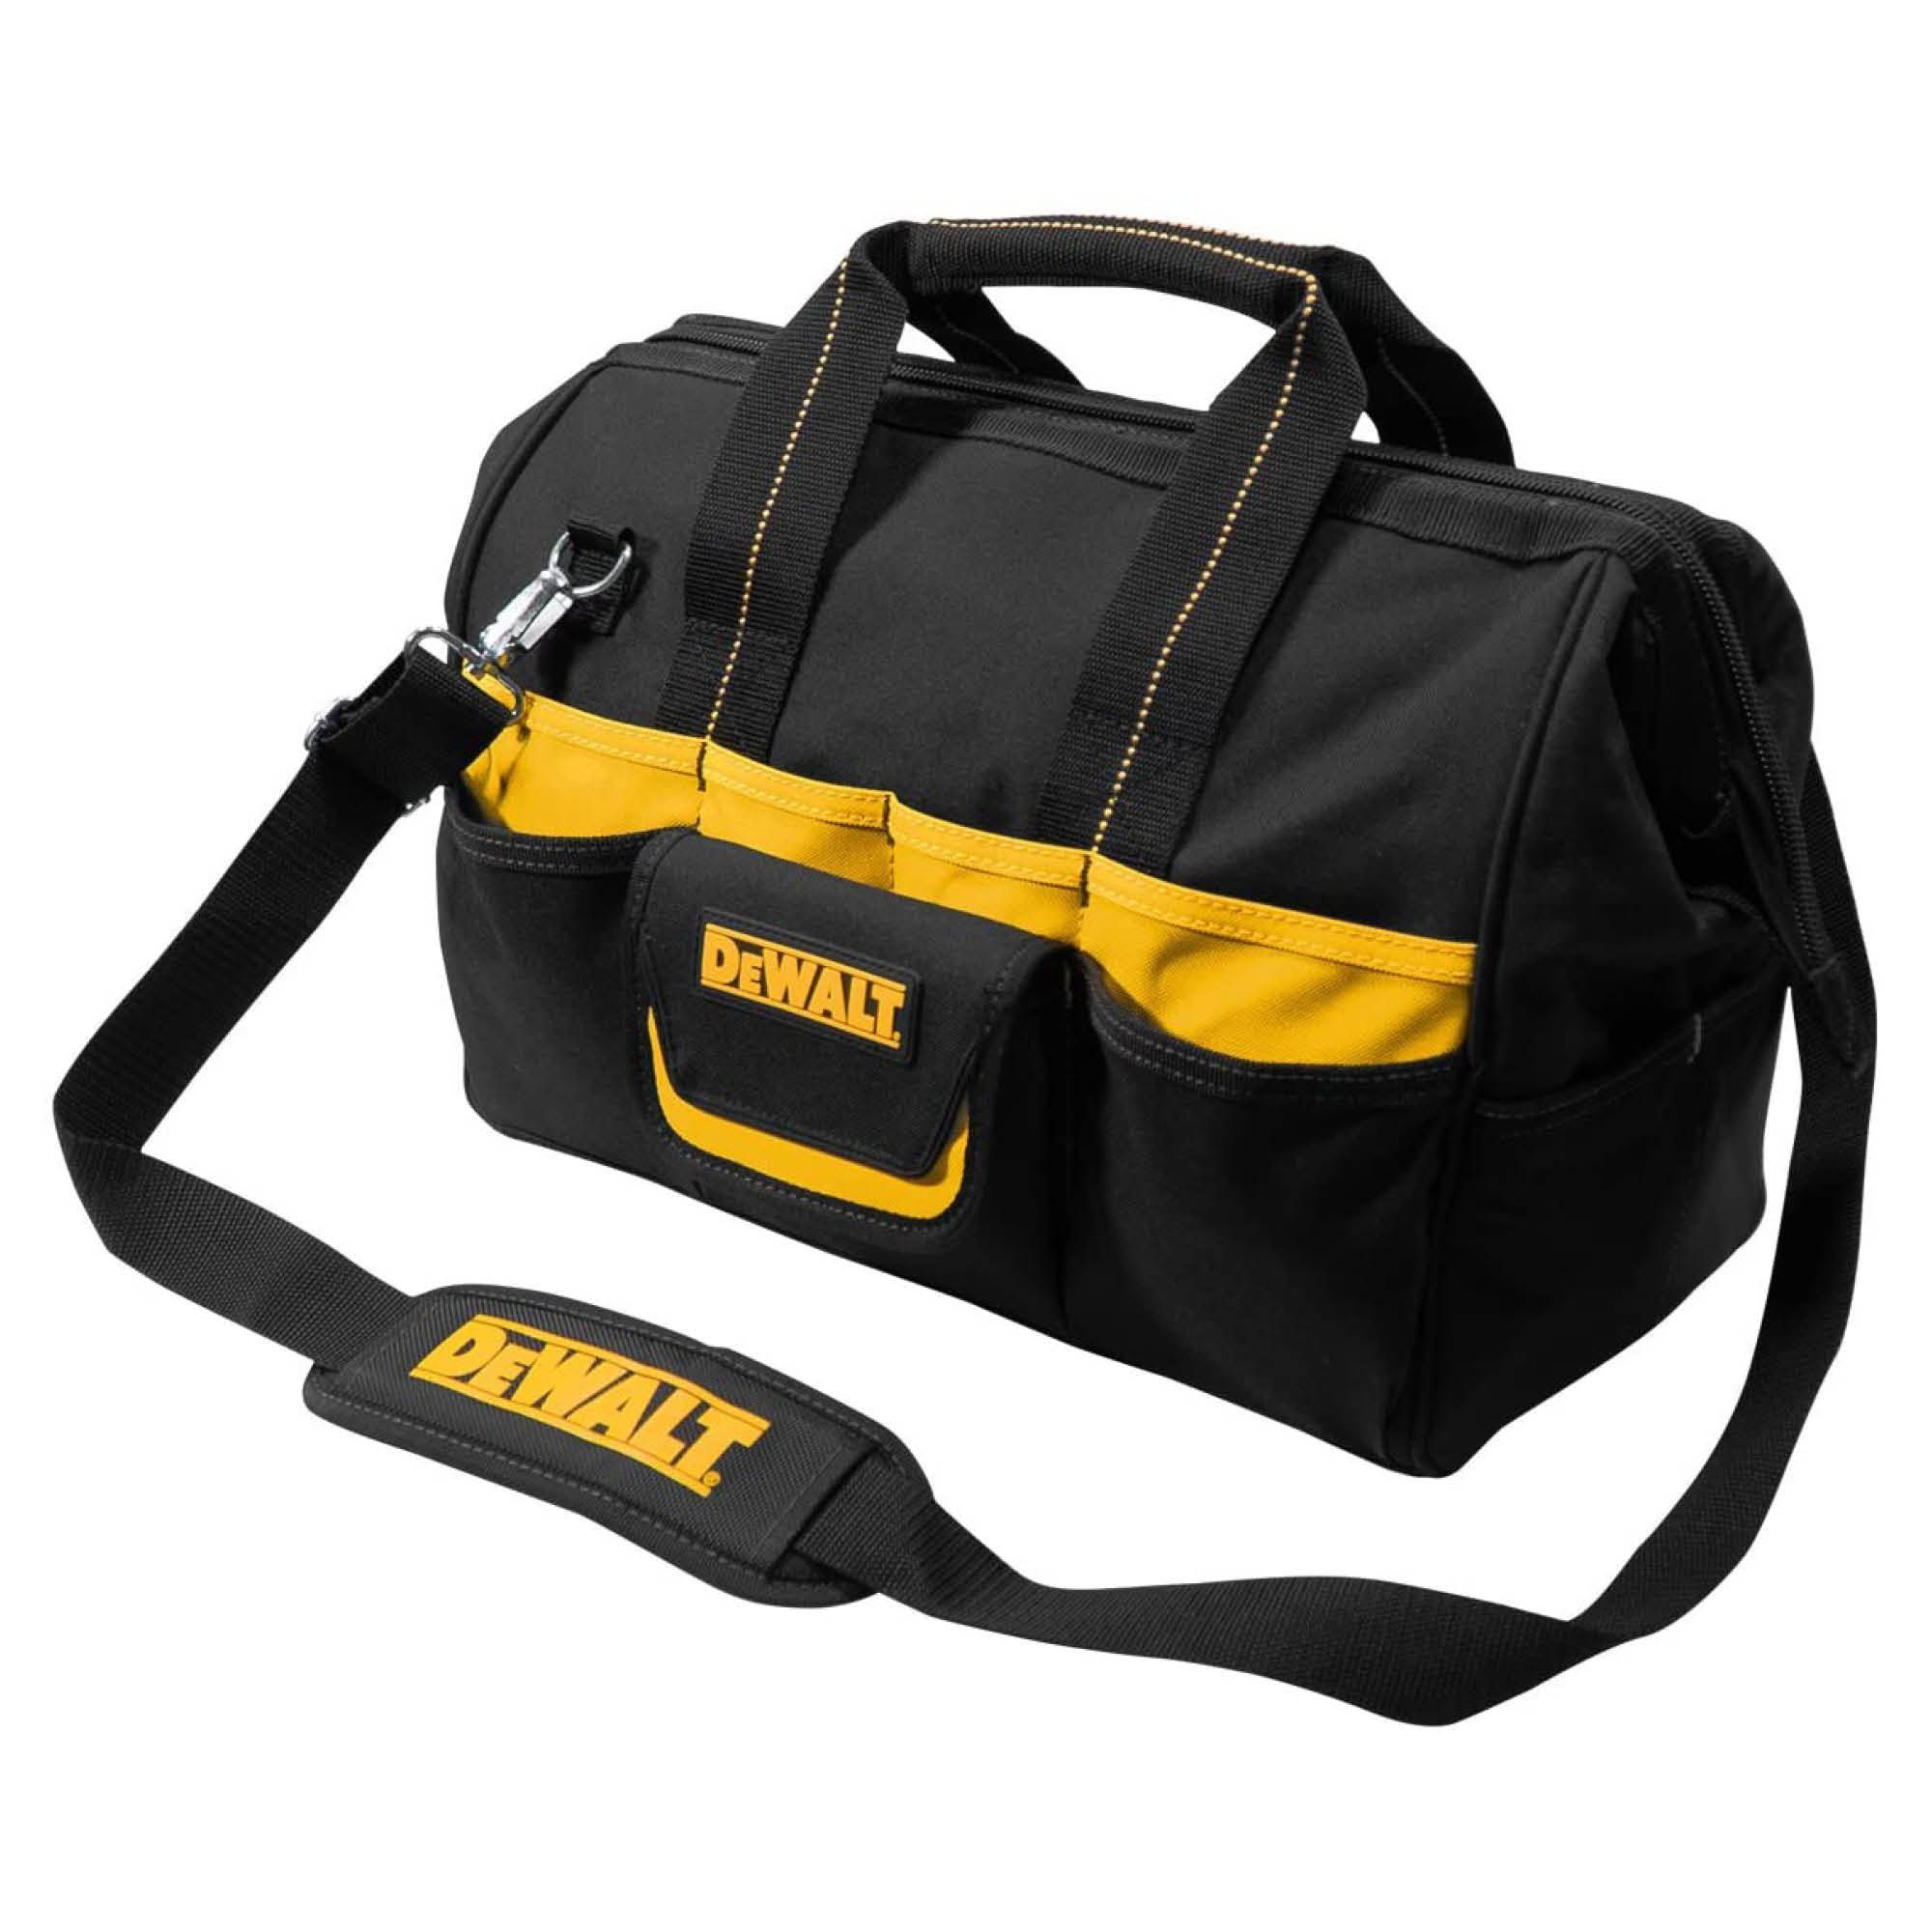 Organizing & Storing Small Tools Pencetti 8-Piece Small Tool Bag Value Set Perfect for Sorting Includes 4 Heavy-Duty Canvas Tool Bags in Gusset Style w/ 4 Carabiners